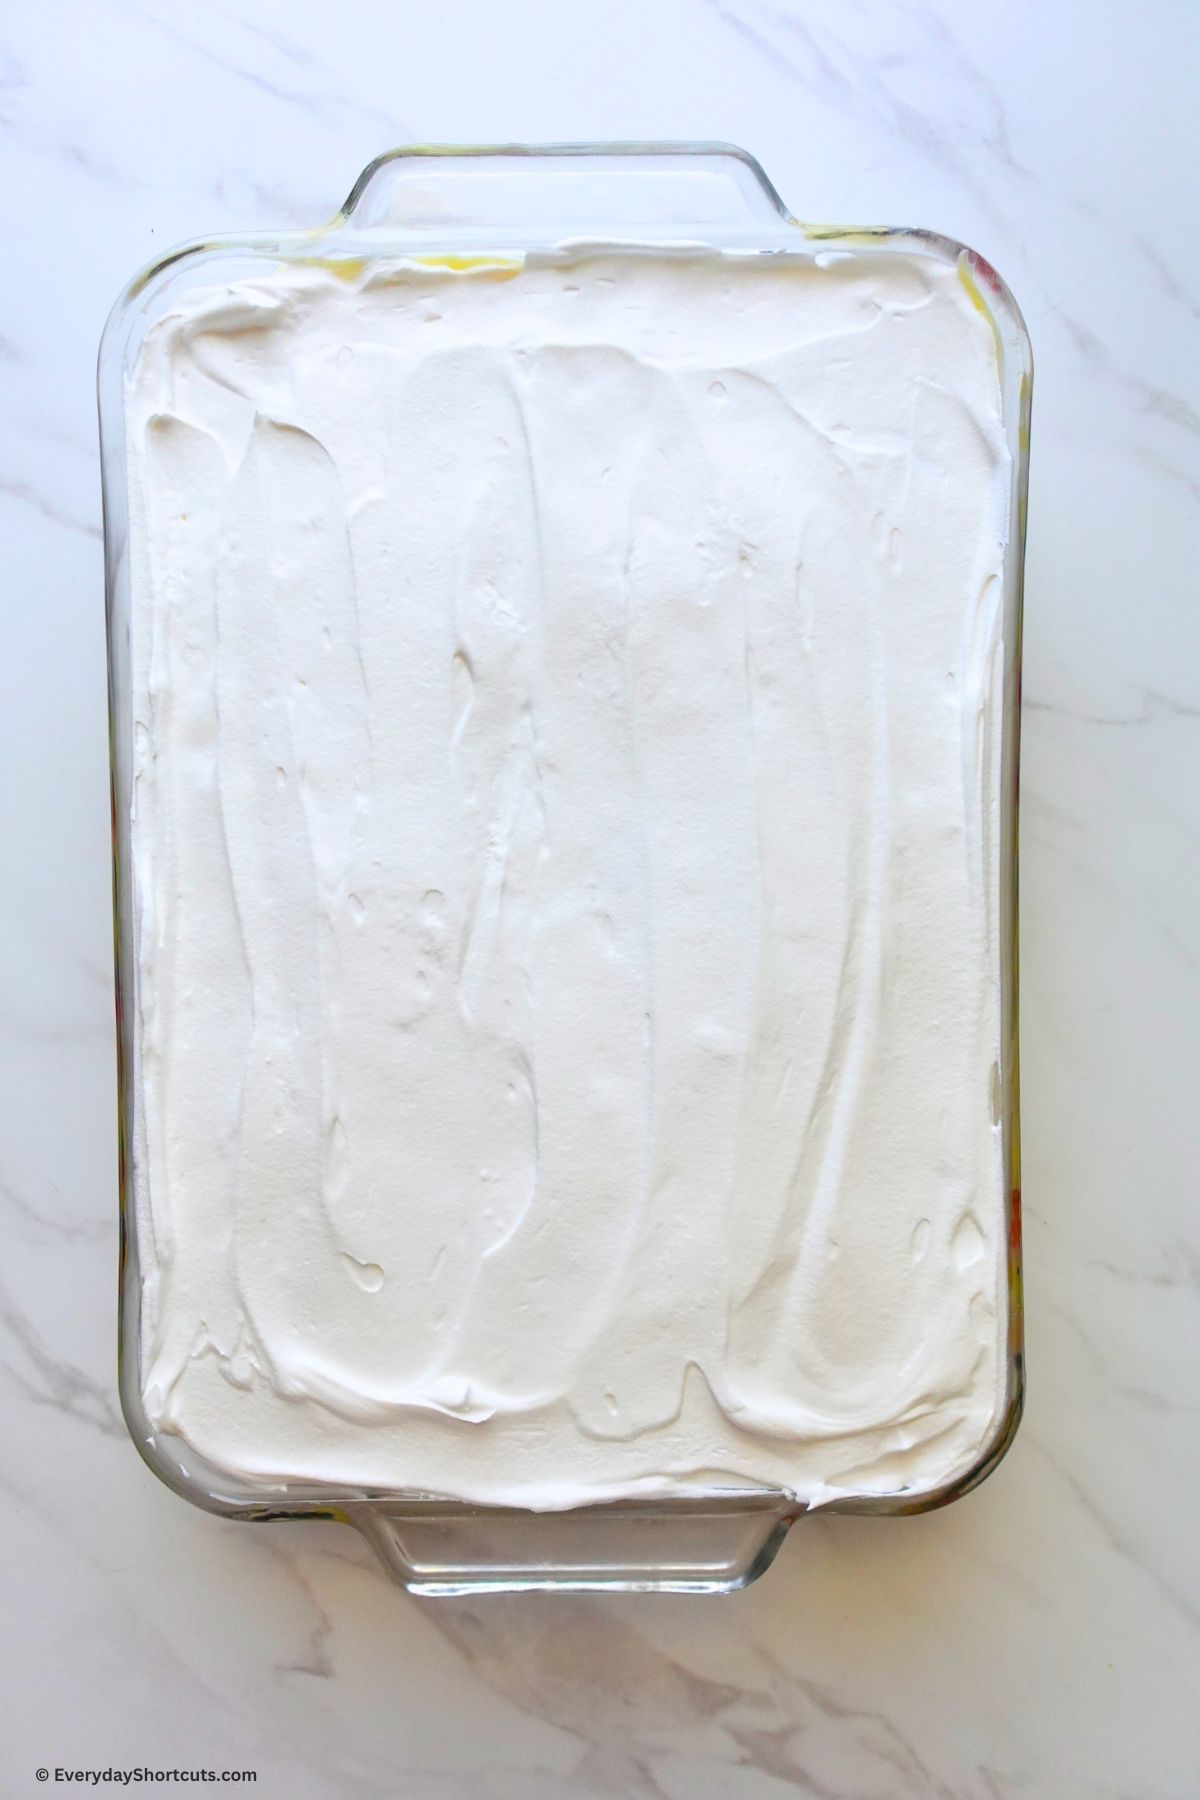 whipped topping on creamy pudding layer in baking dish